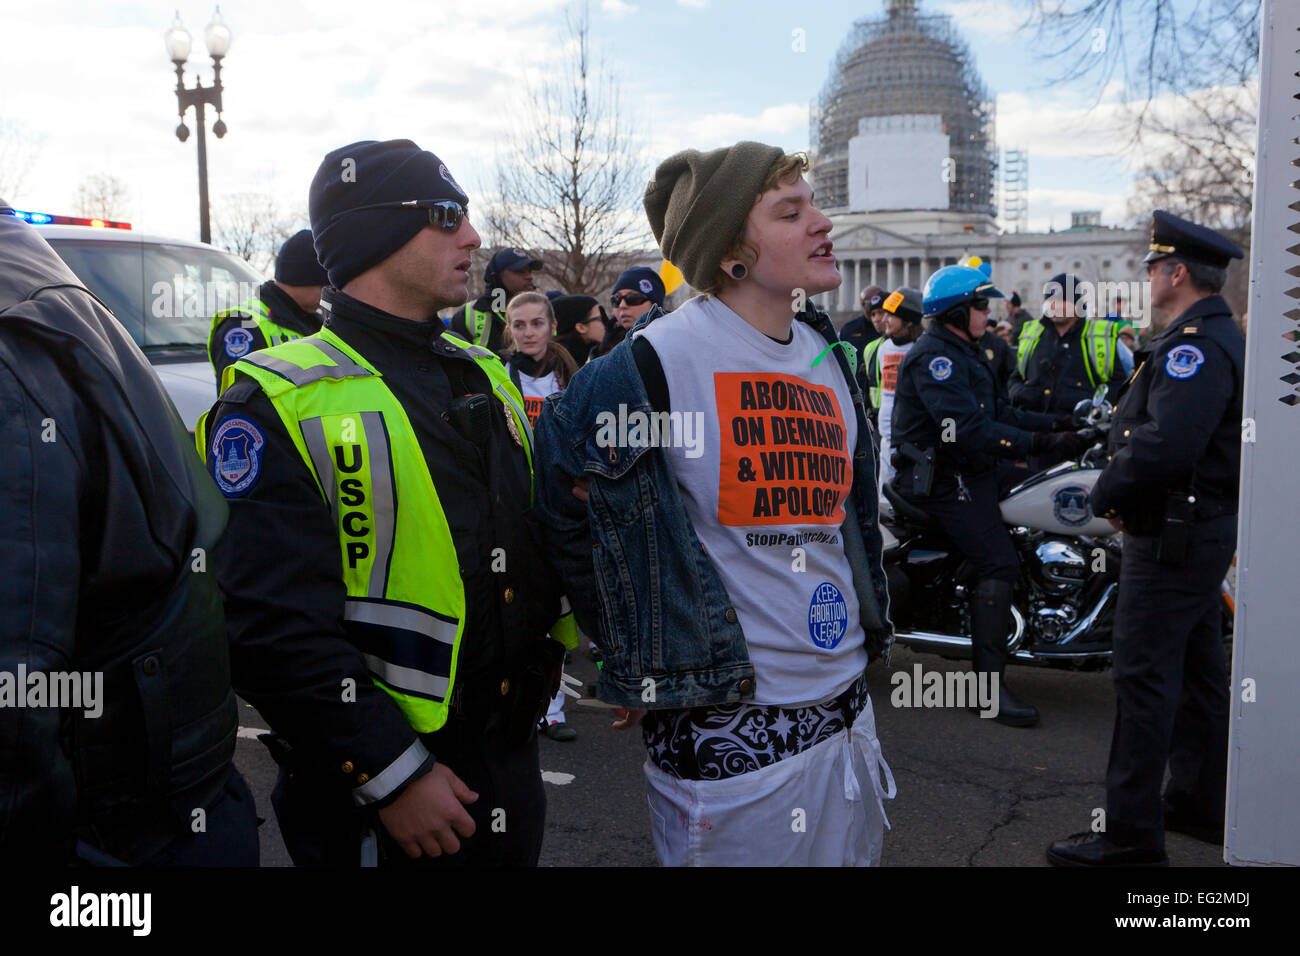 Pro-Choice activist arrested for civil disobedience during Pro-Life march - January 22, 2015, Washington, DC USA Stock Photo